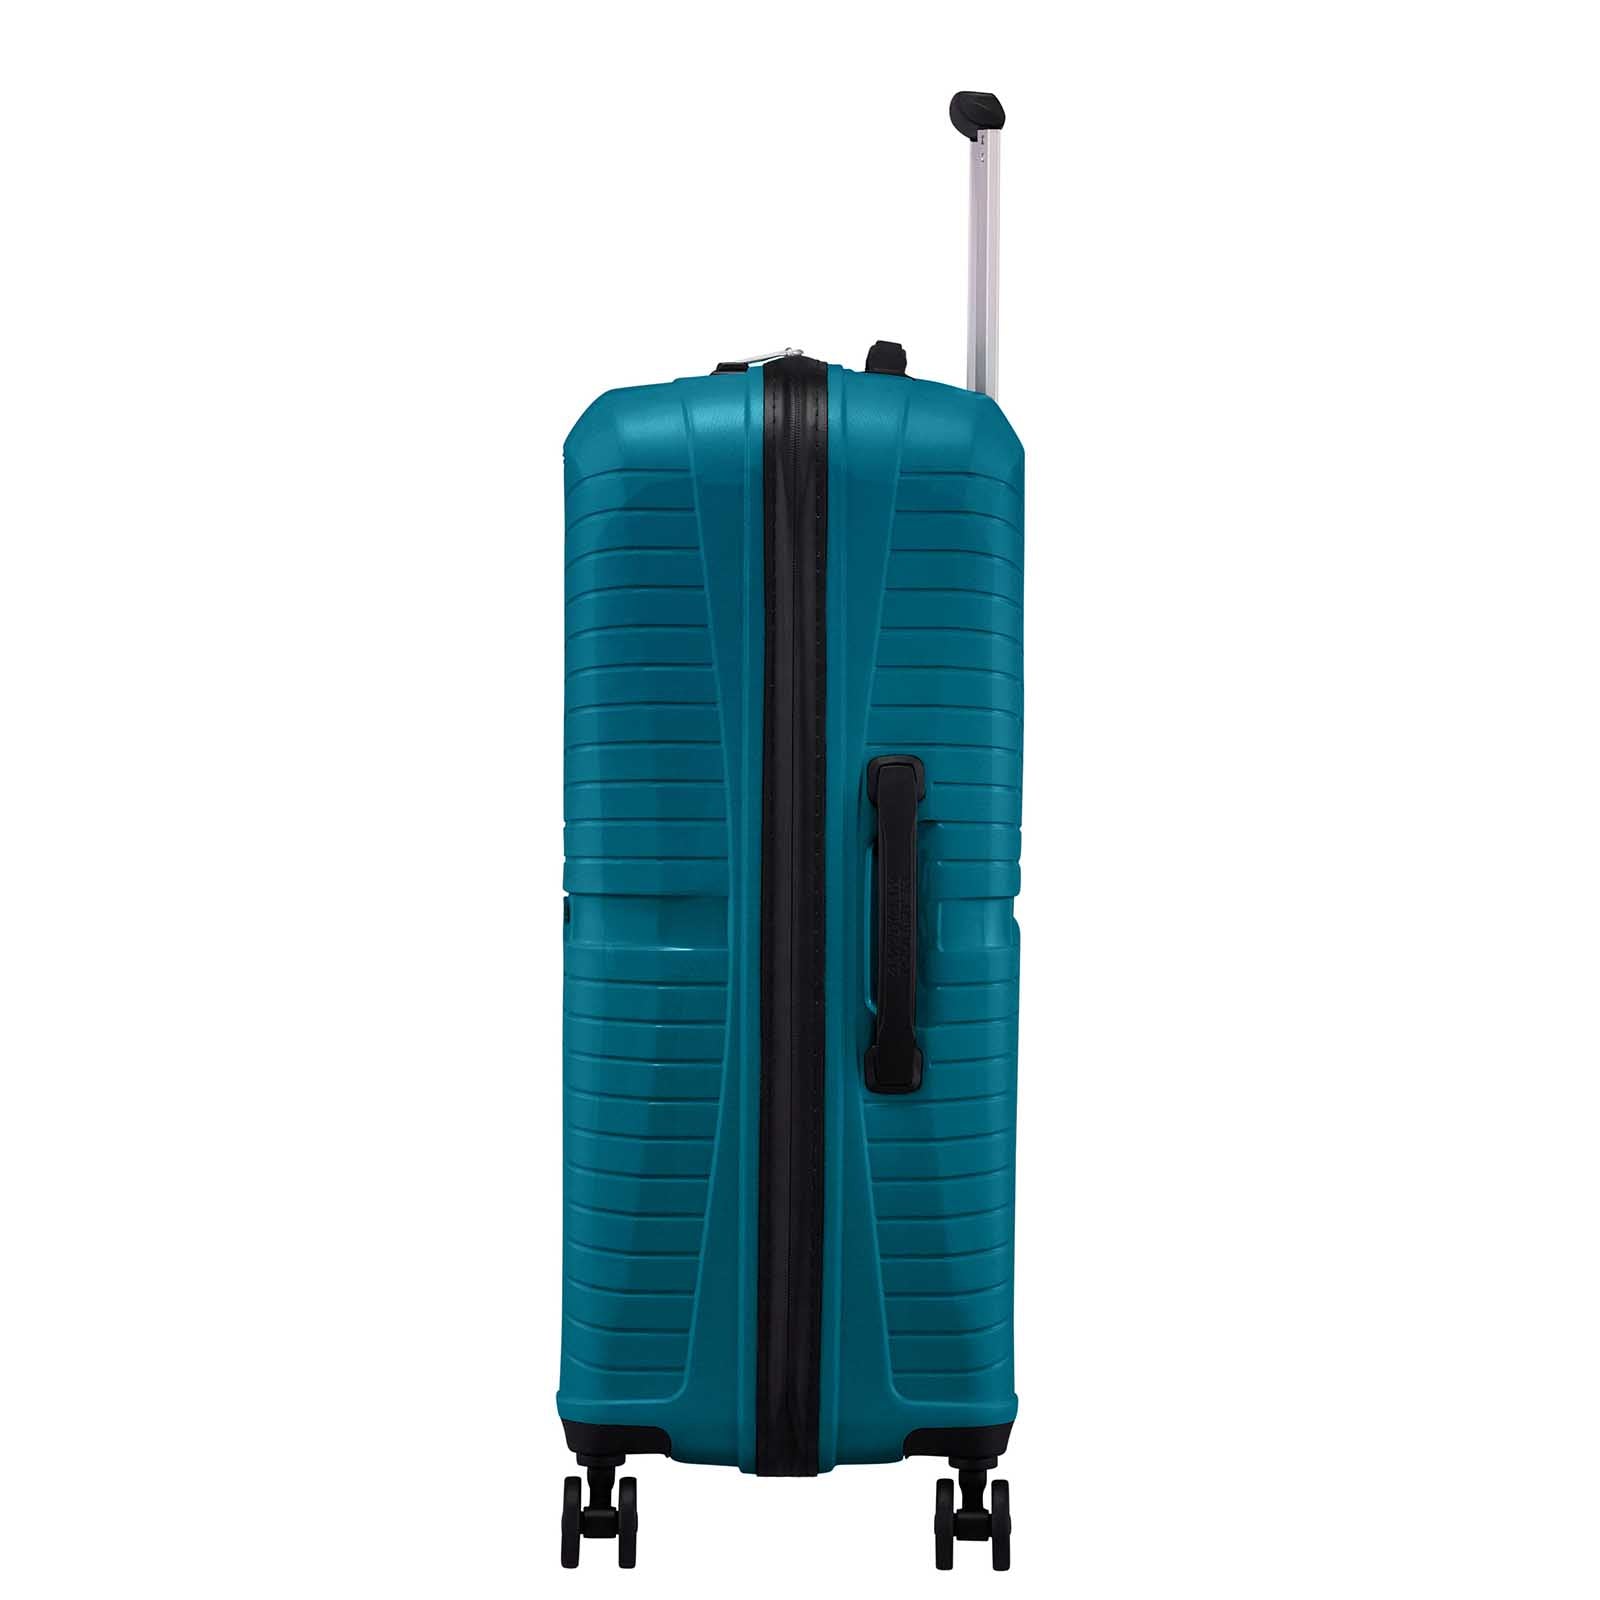 American-Tourister-Airconic-67cm-Suitcase-Deep-Ocean-Side-Handle